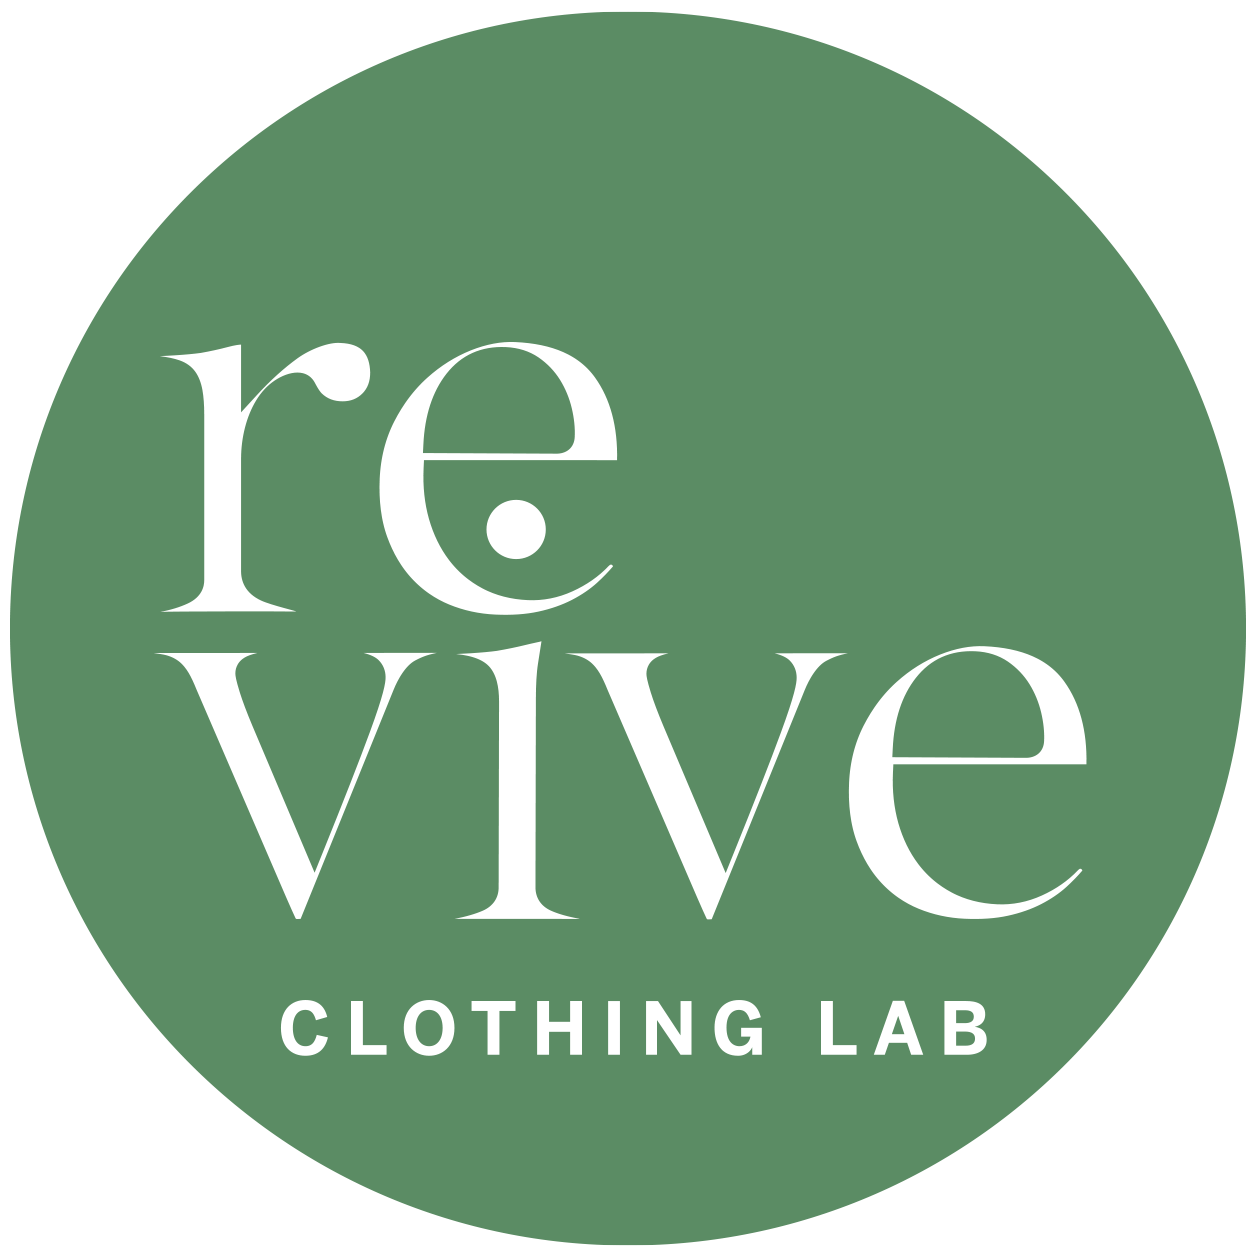 Revive Clothing Lab